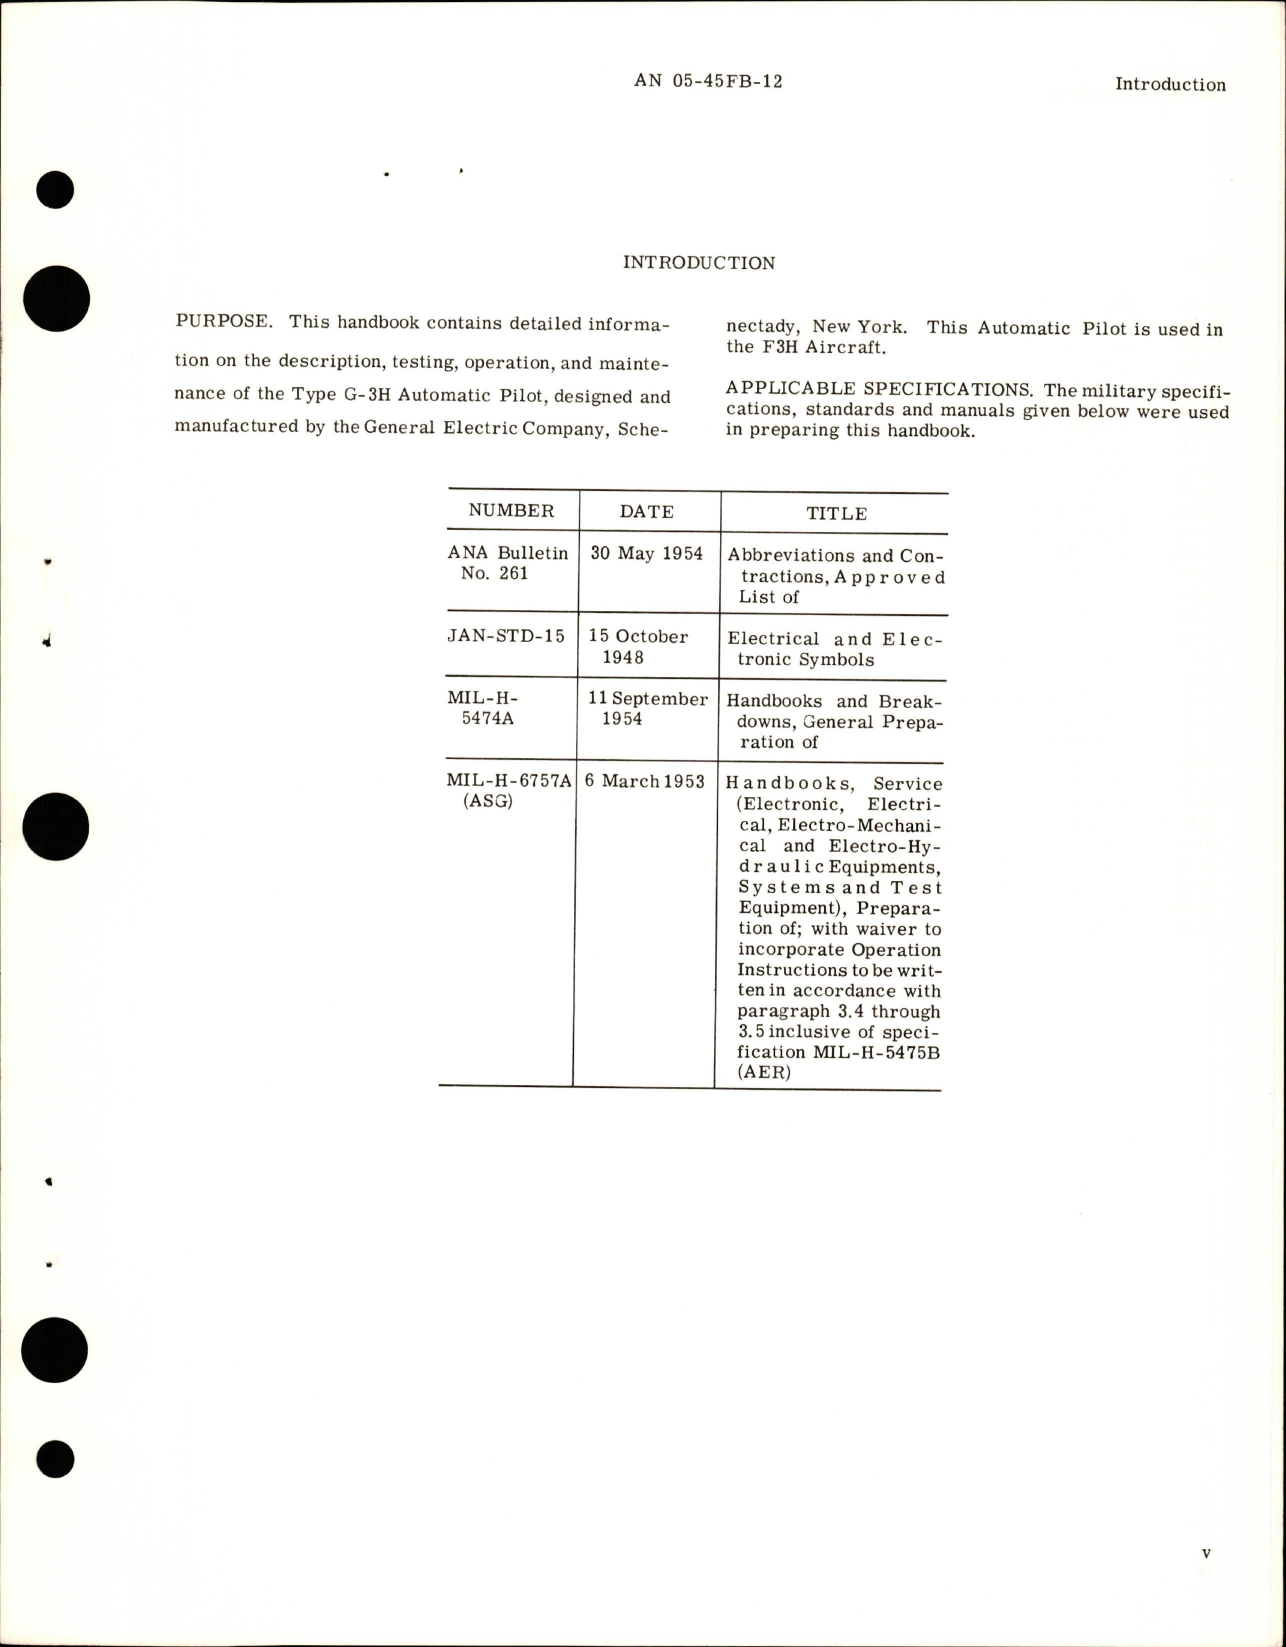 Sample page 7 from AirCorps Library document: Operation and Service Instructions for G-3H Automatic Pilot - Model 2CJ4D1 